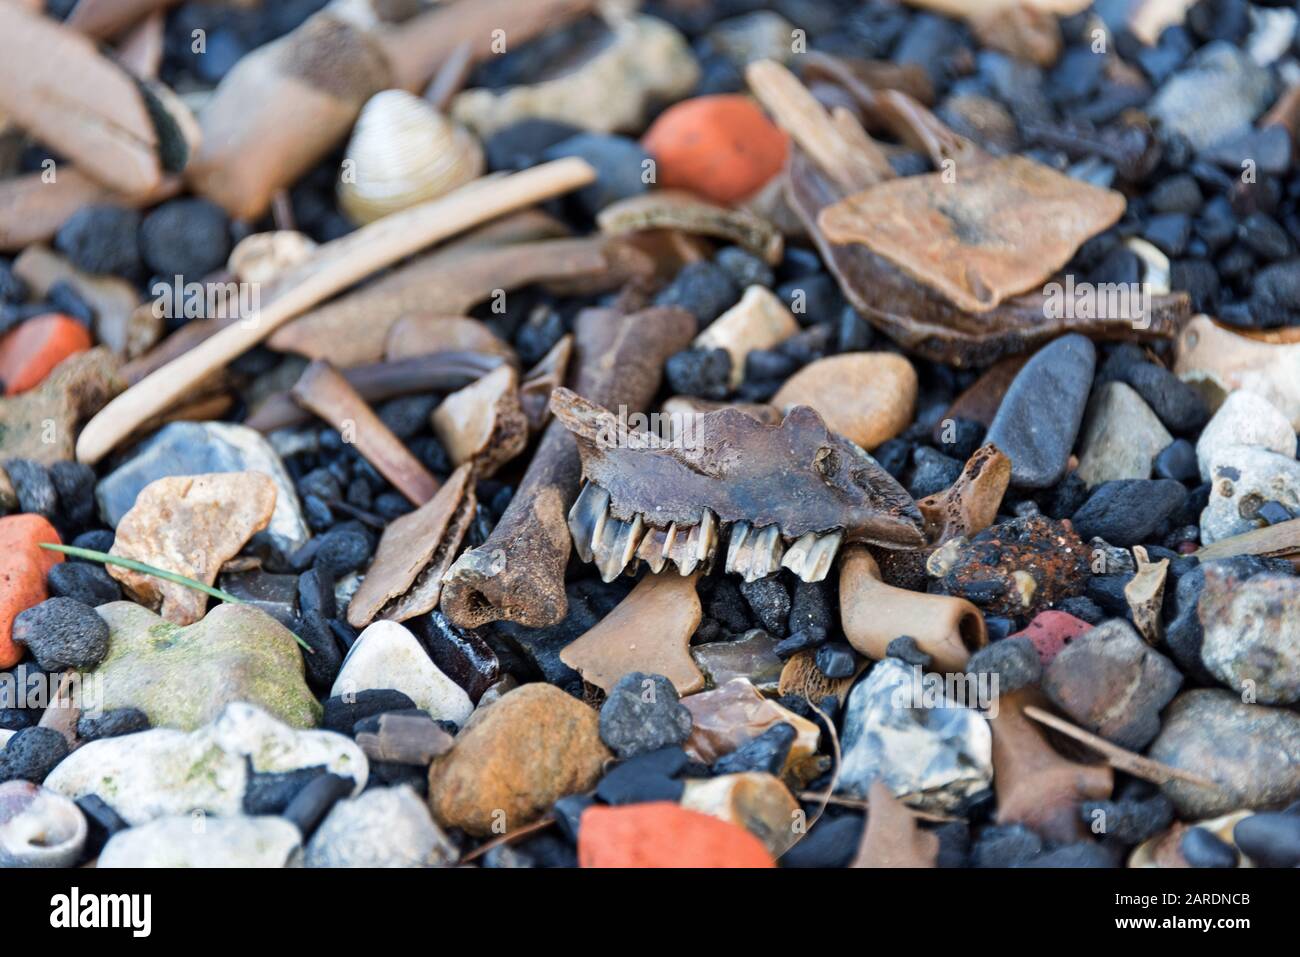 Part of an old jawbone, probably goat or sheep, washed up with bits of coal, brick, and other animal bones on the Thames foreshore. Stock Photo